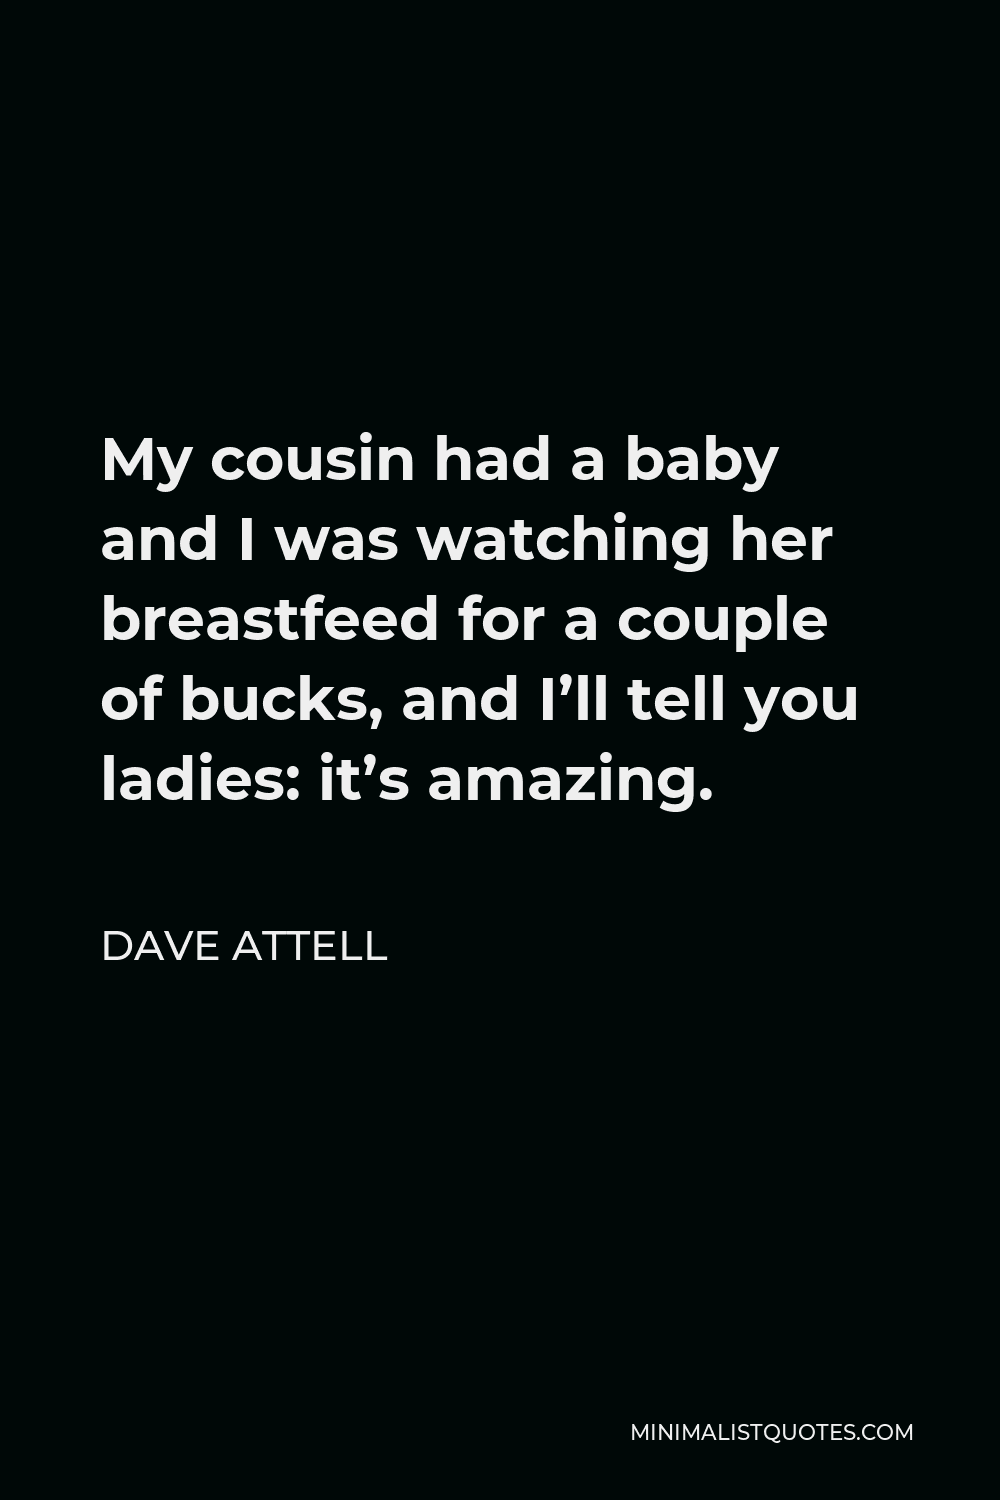 Dave Attell Quote - My cousin had a baby and I was watching her breastfeed for a couple of bucks, and I’ll tell you ladies: it’s amazing.